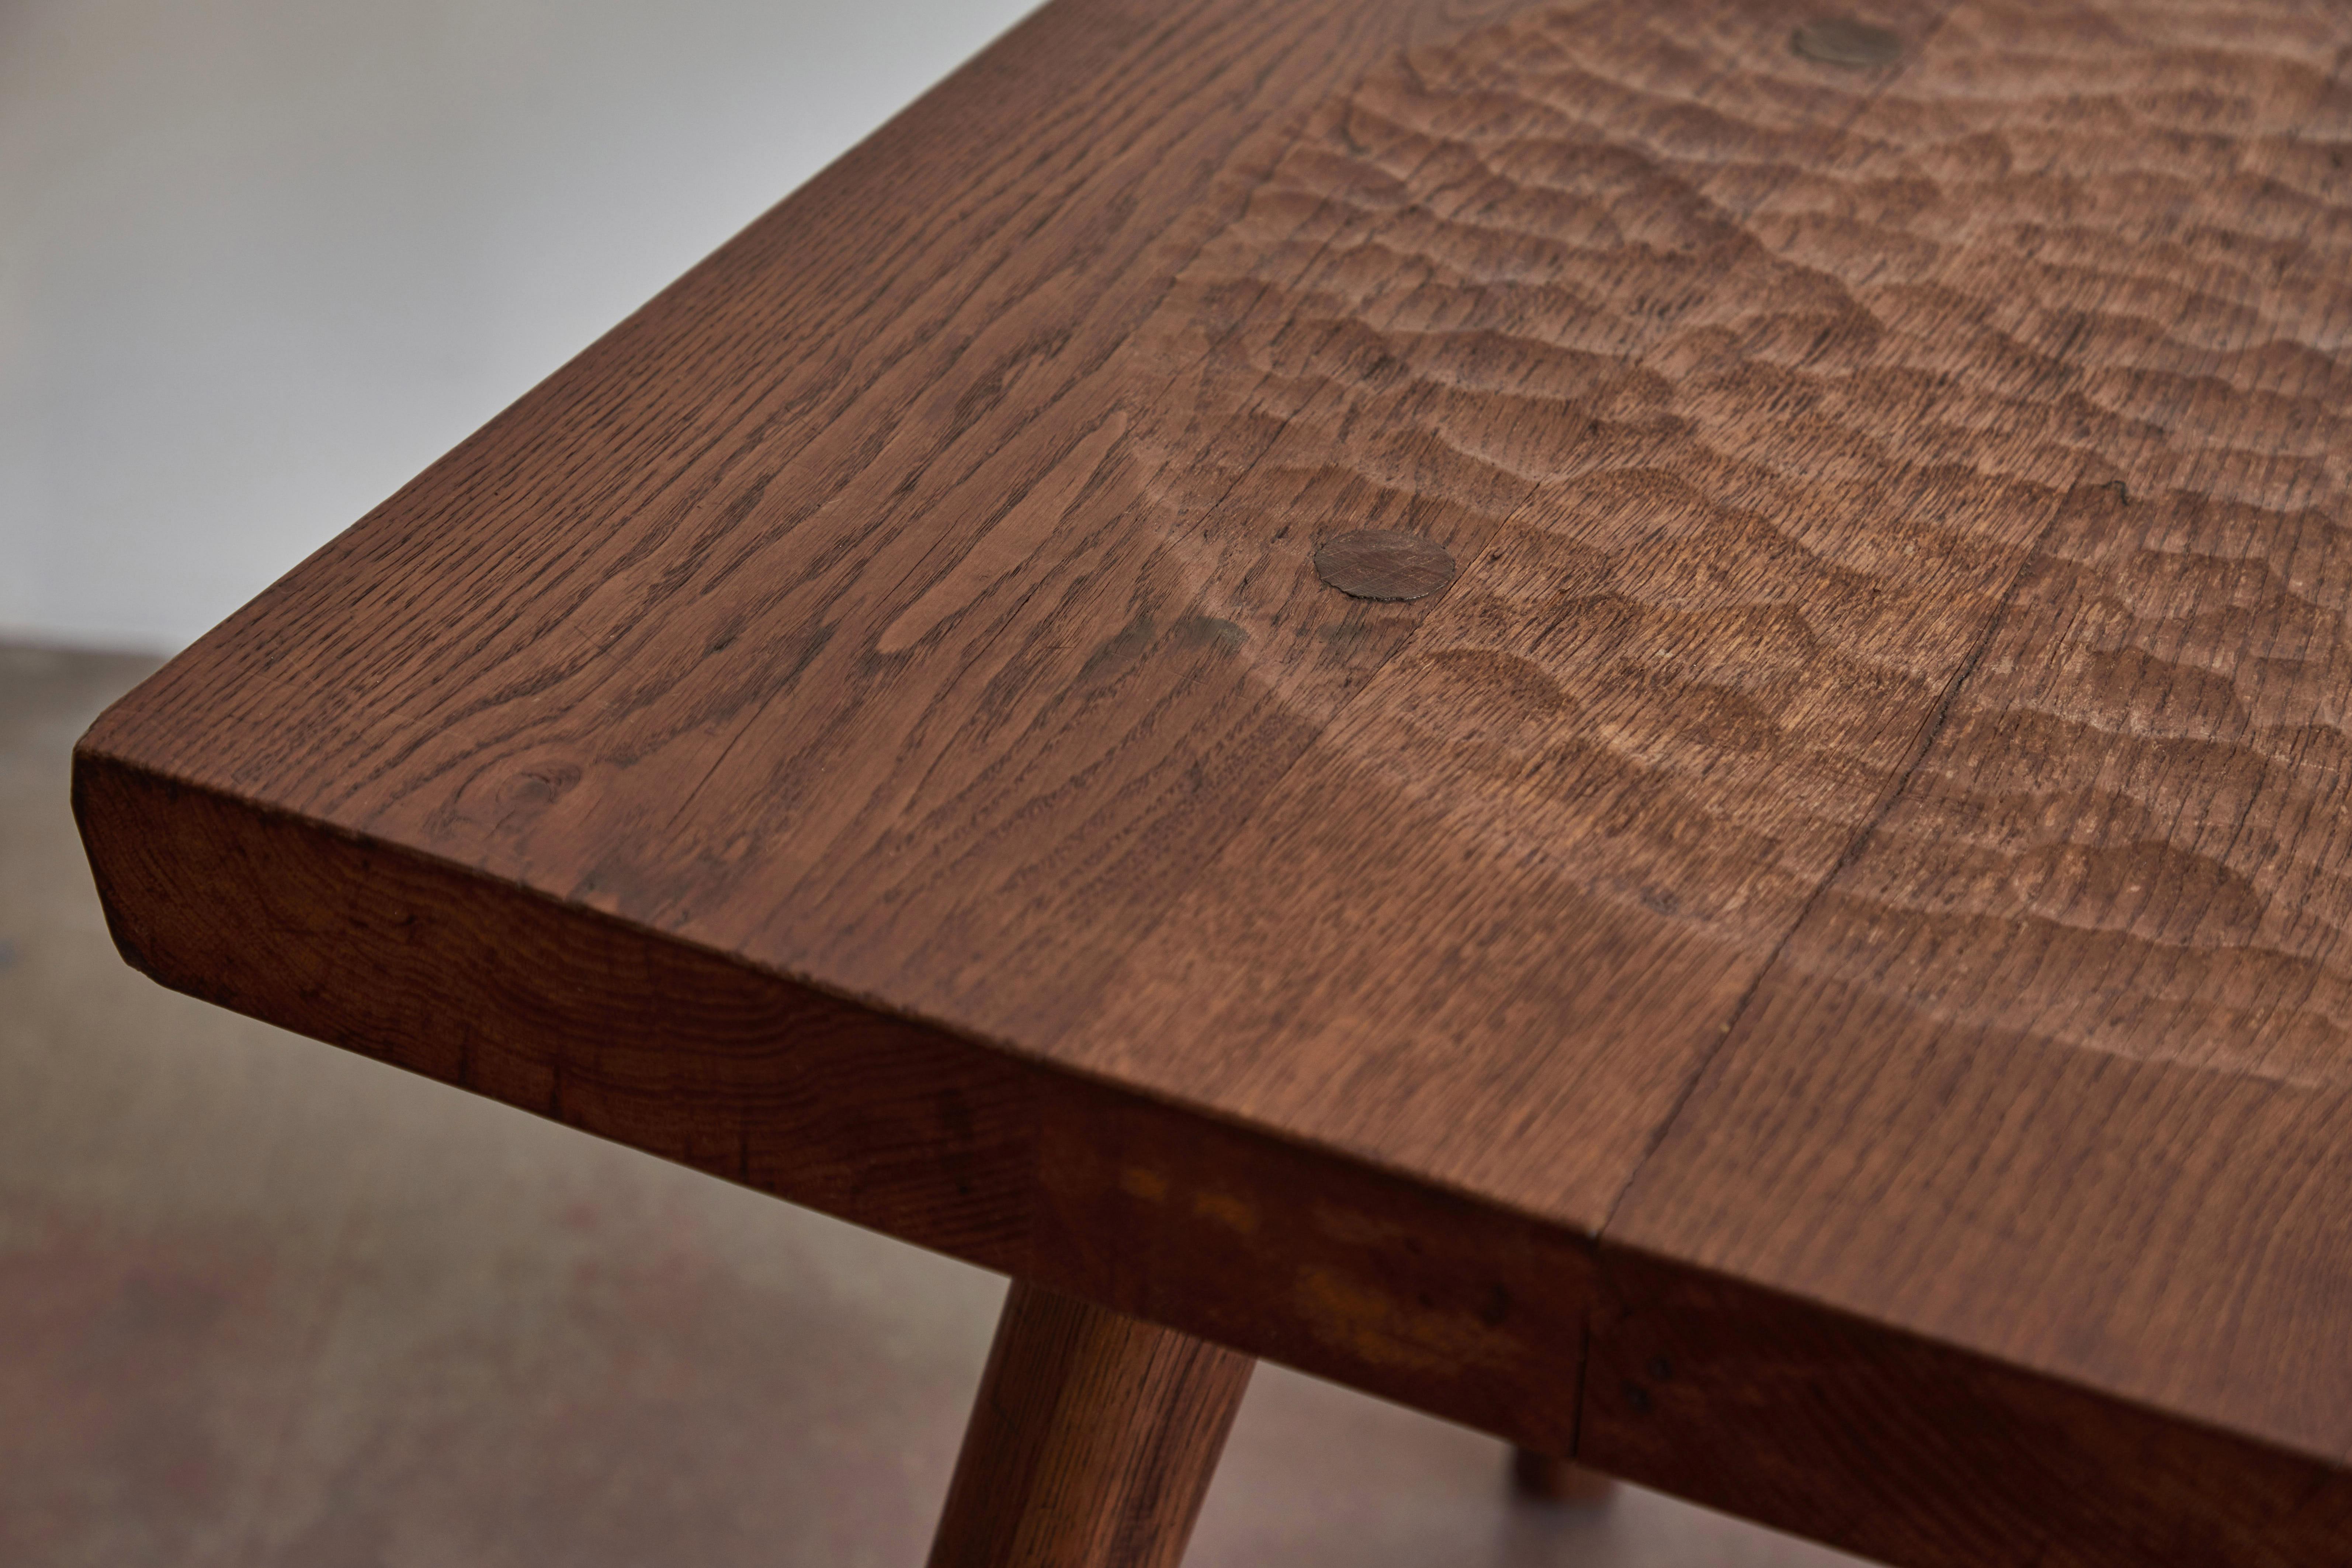 Carved Oak Side Table by Jean Touret and the Artisans of Marolles 1